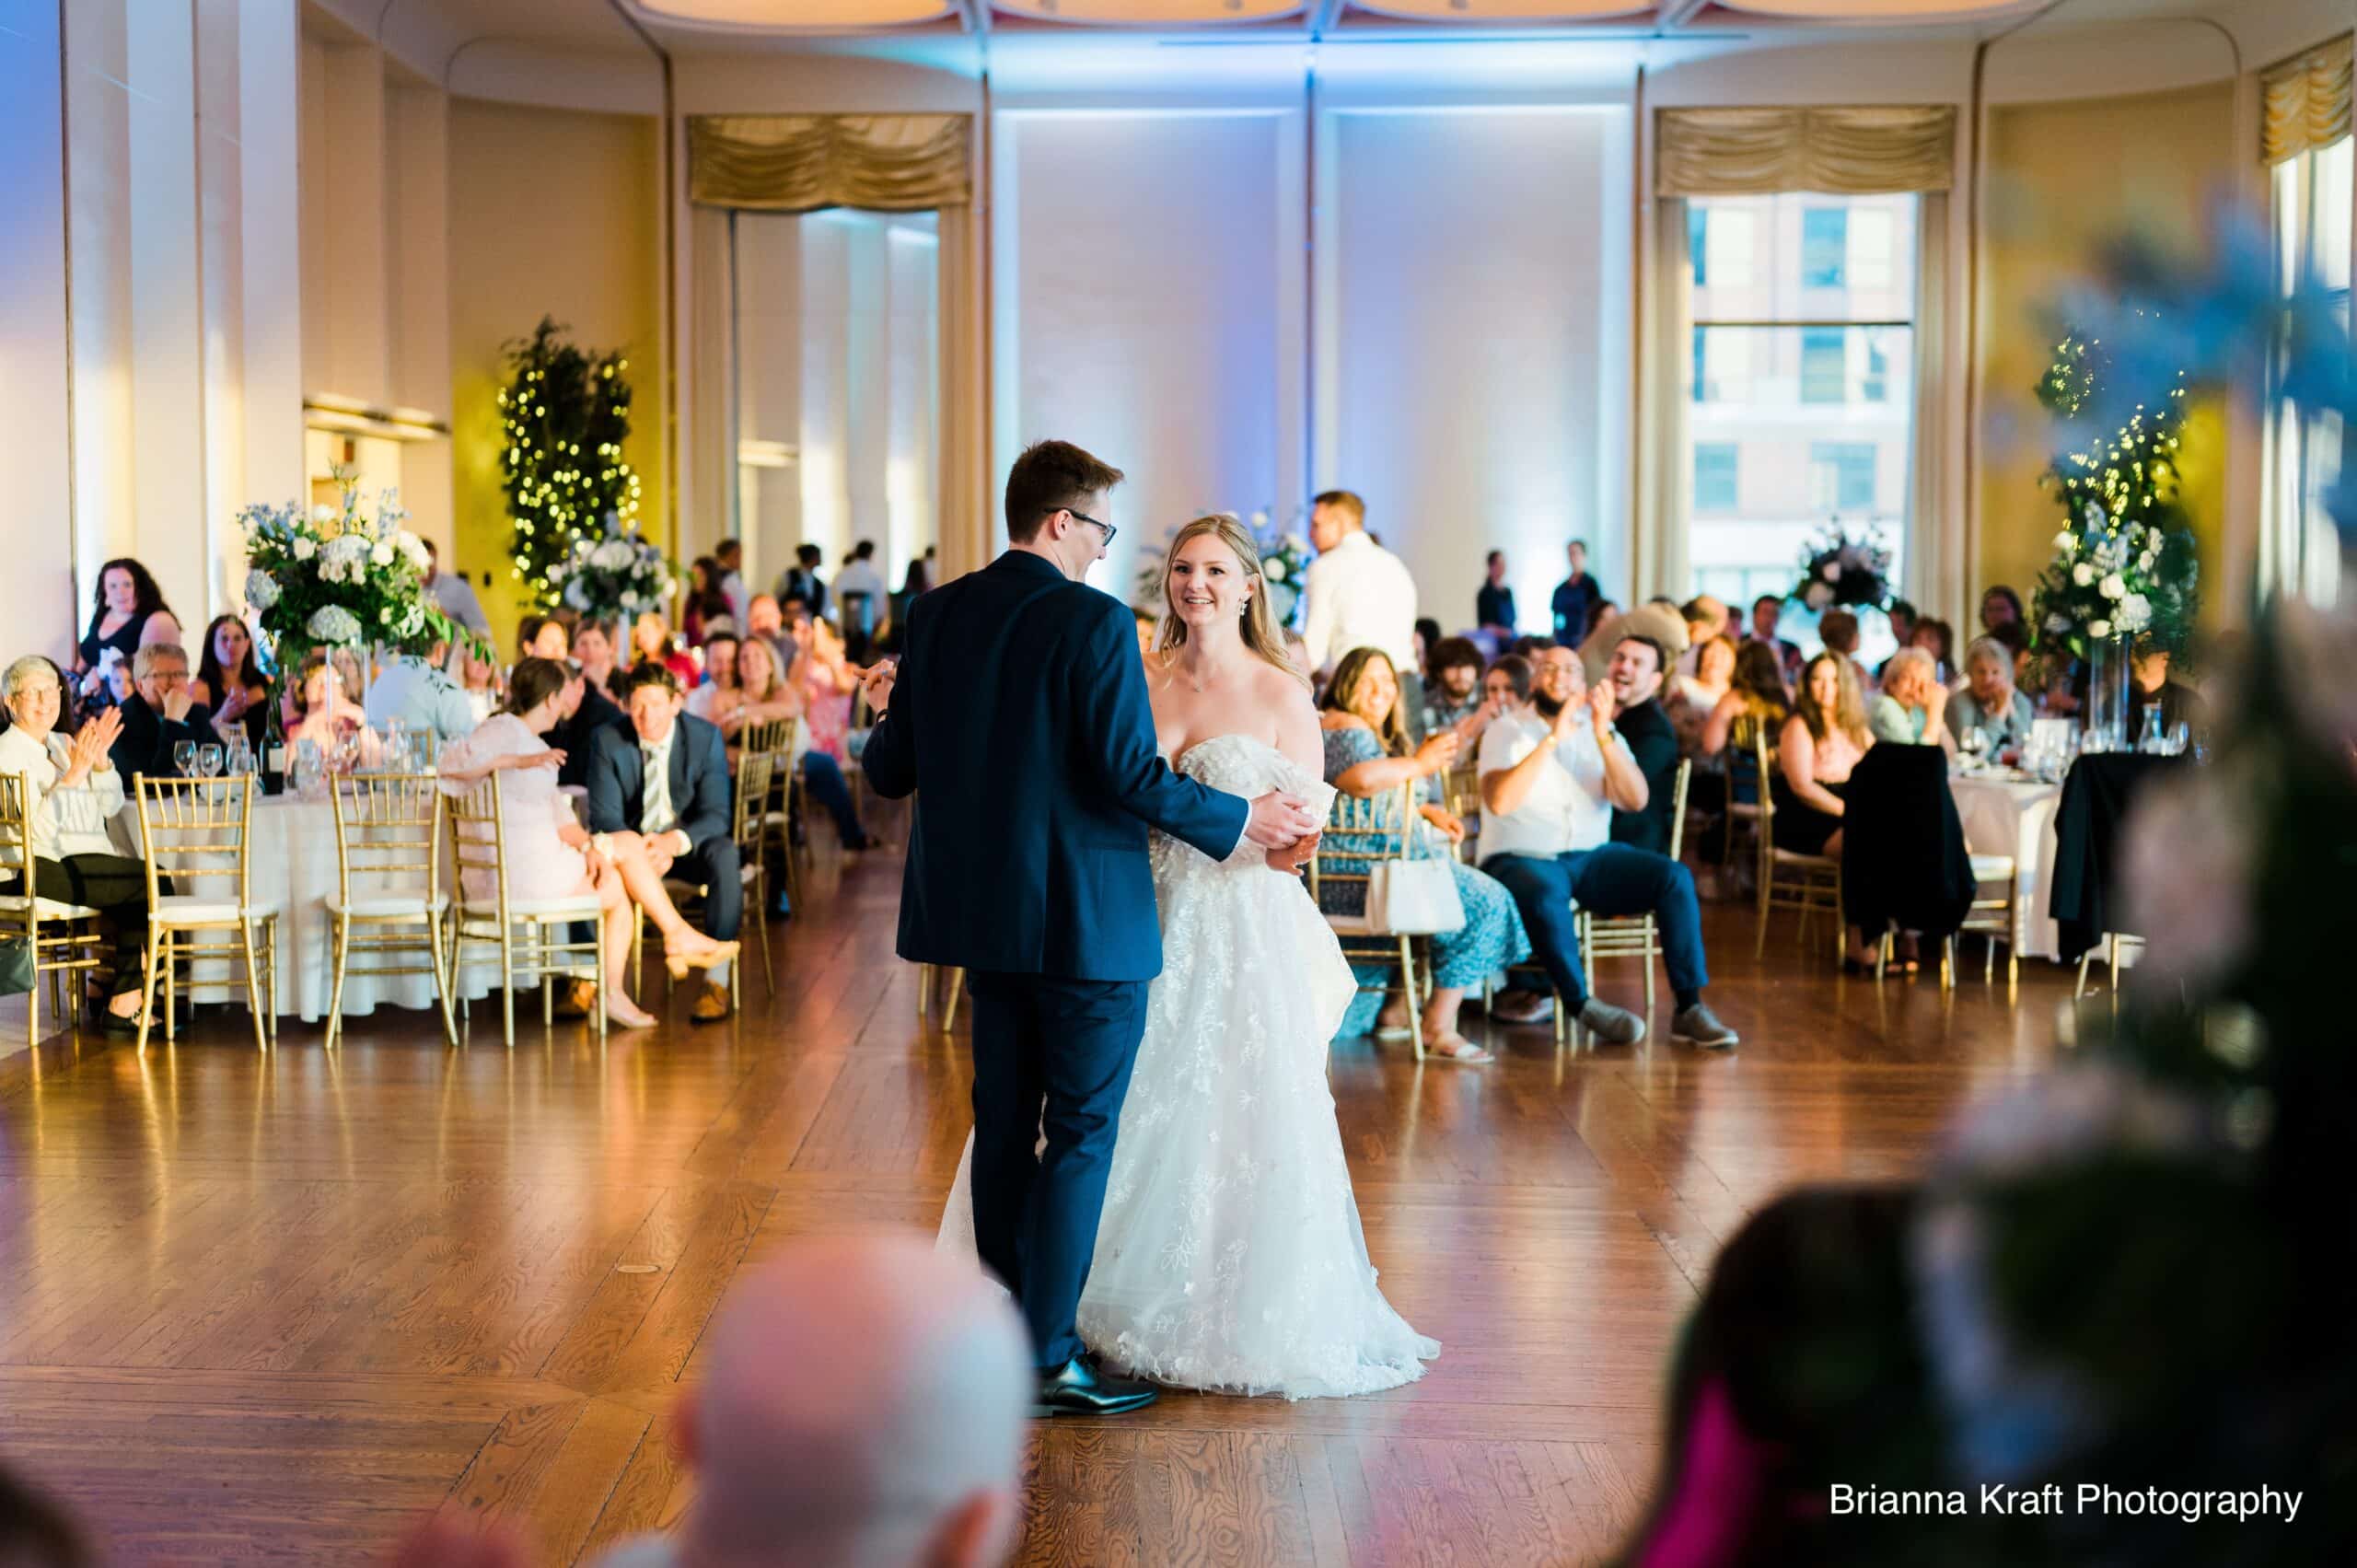 First dance in timeless downtown Milwaukee wedding venue